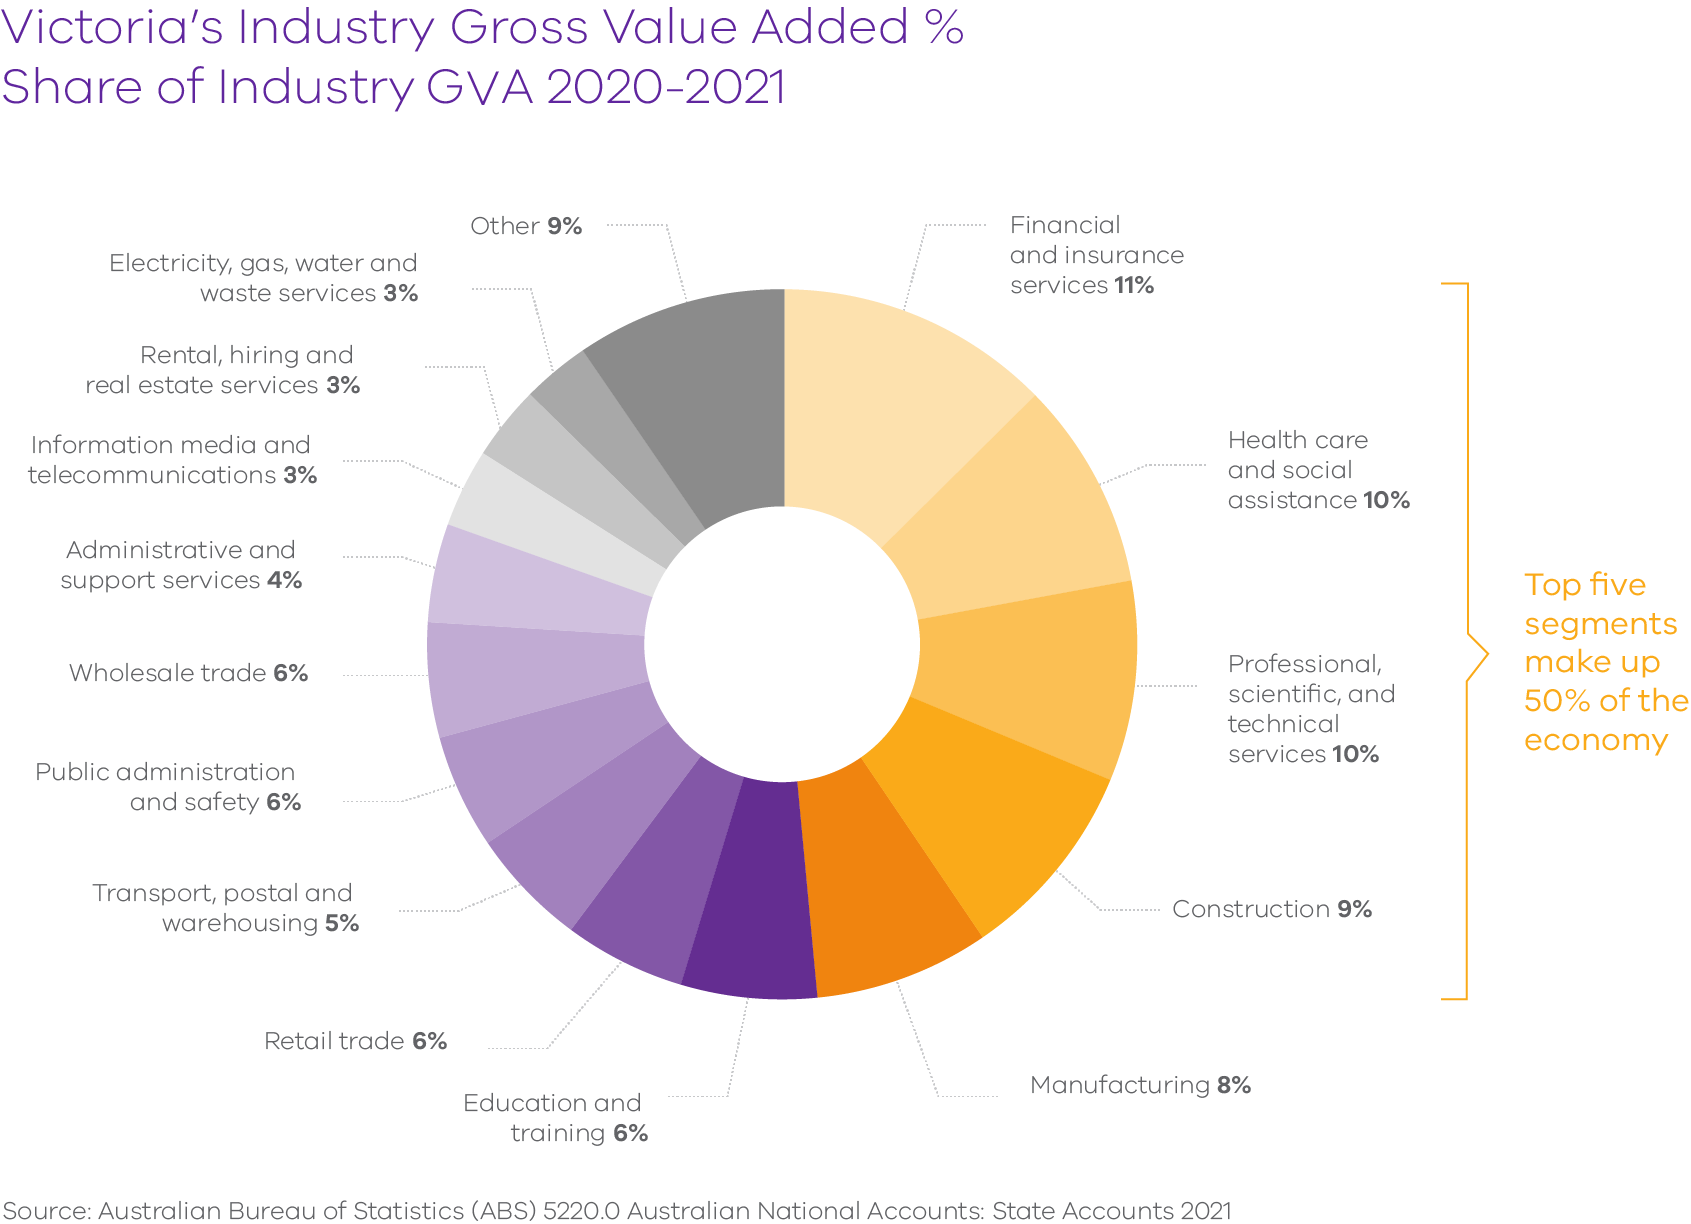 Services industry accounts for 28% of GVA